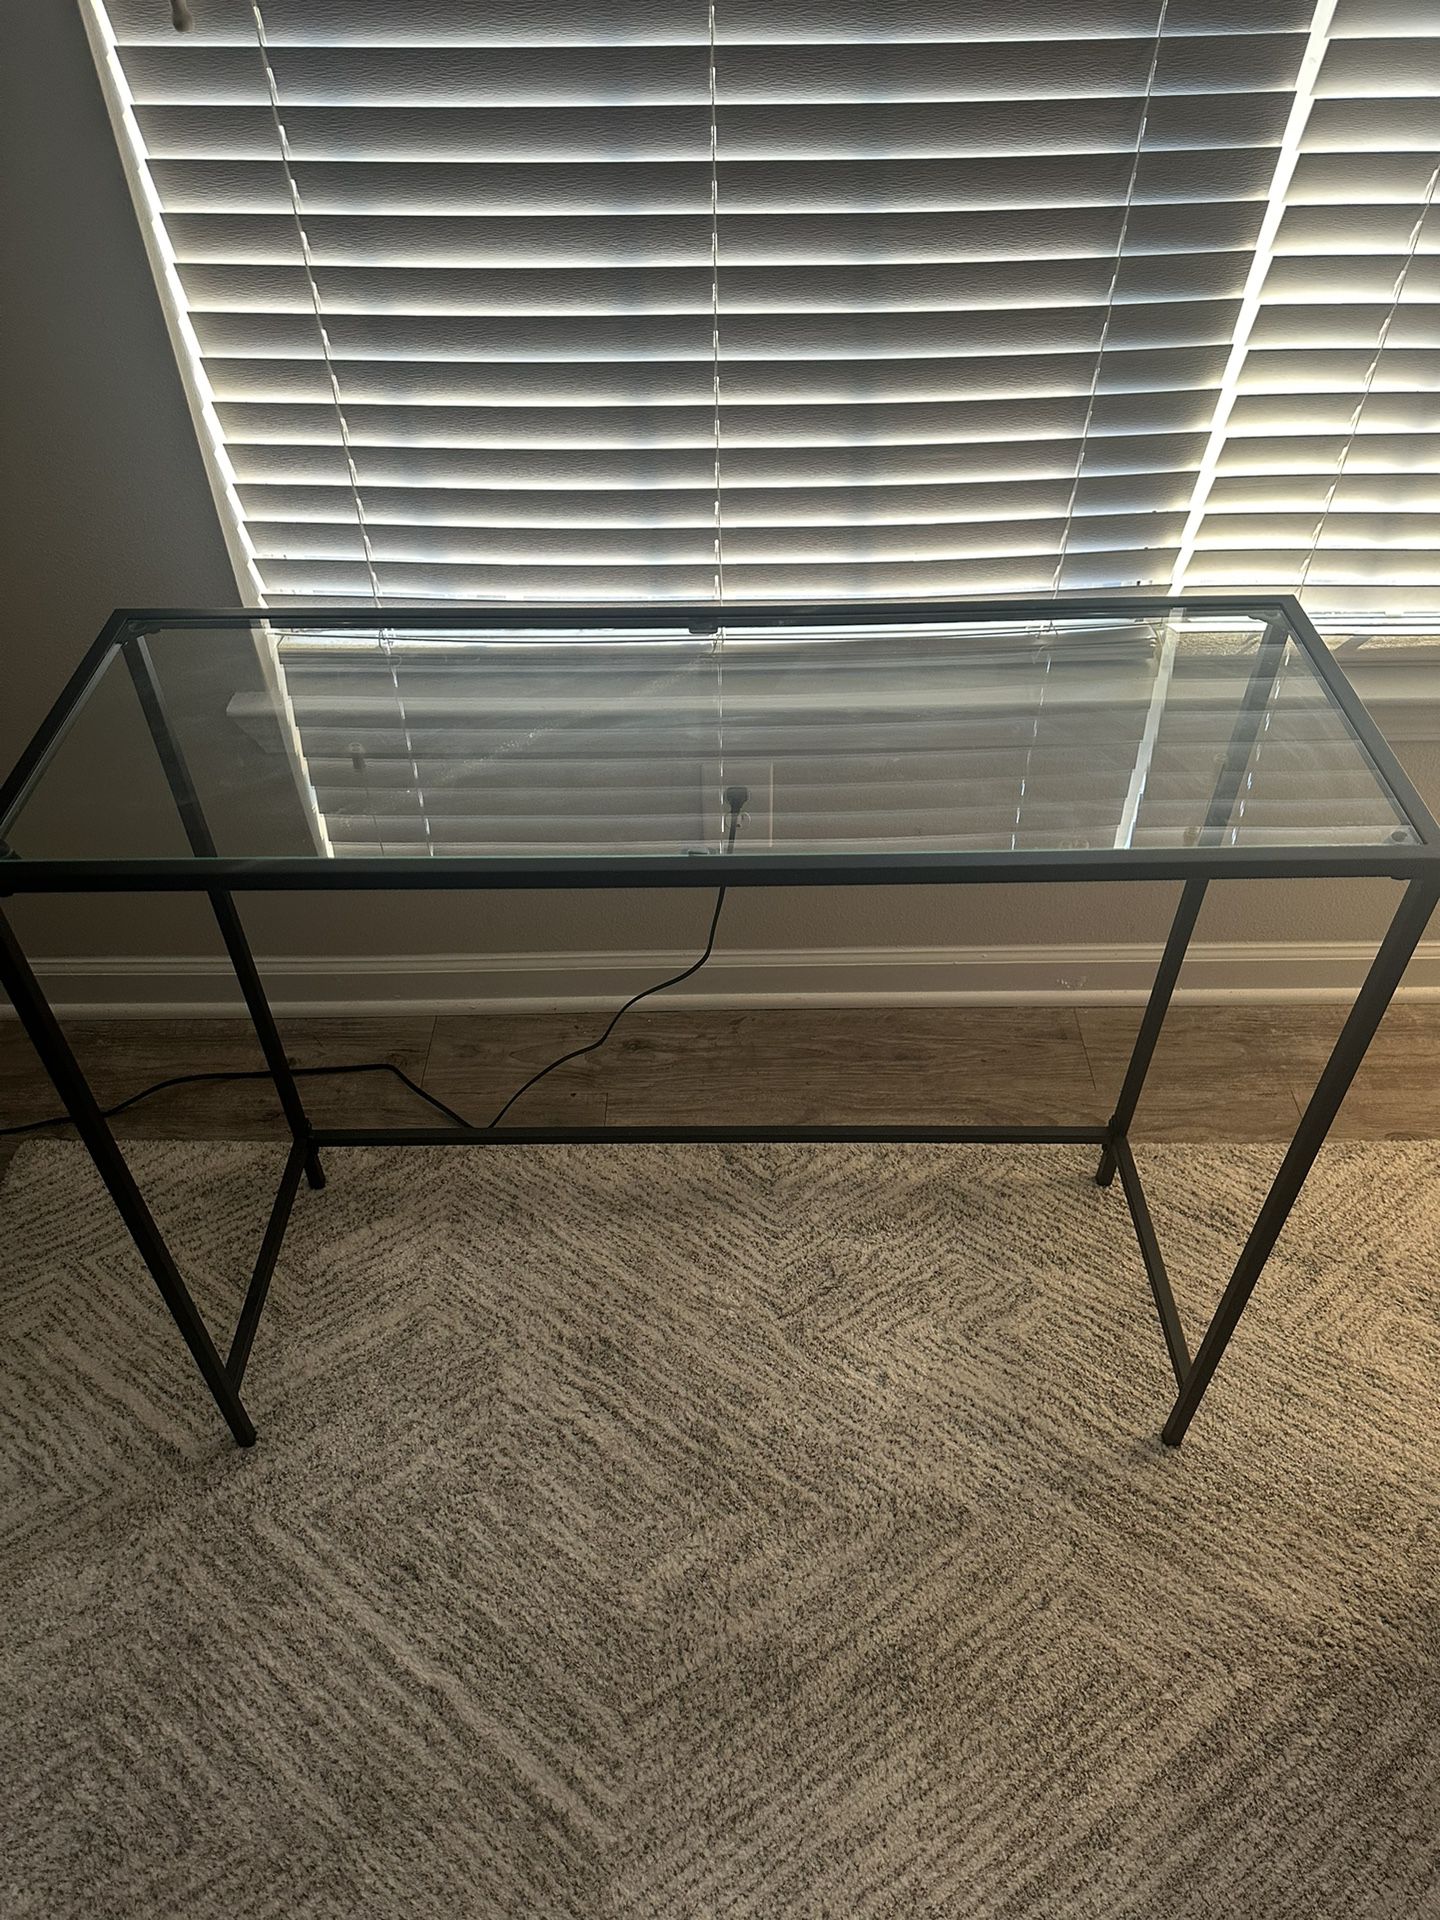 Glass/Metal Console Table